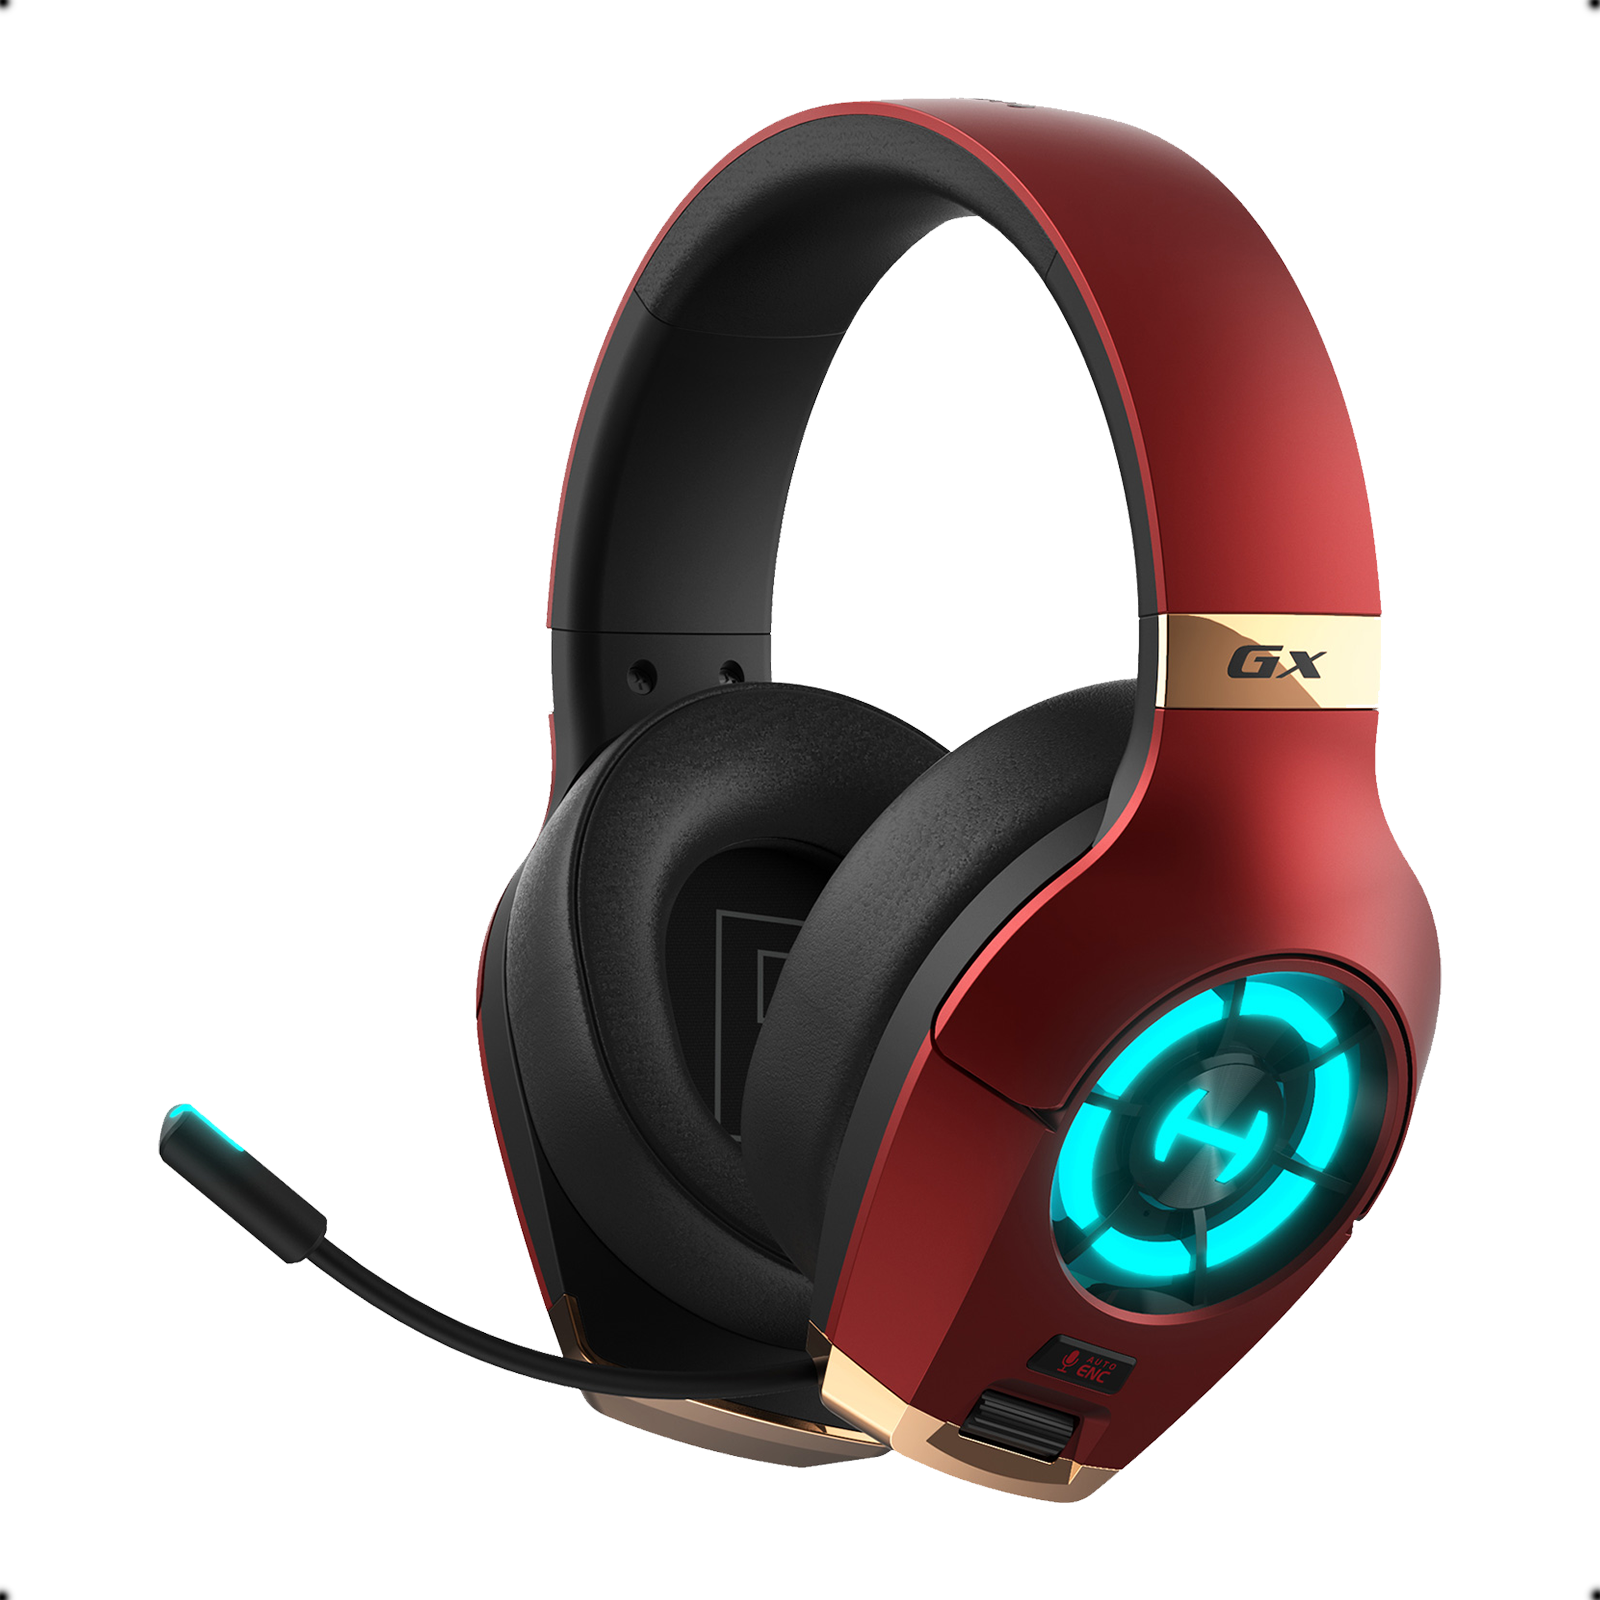 GX Hecate Wireless Gaming Headset